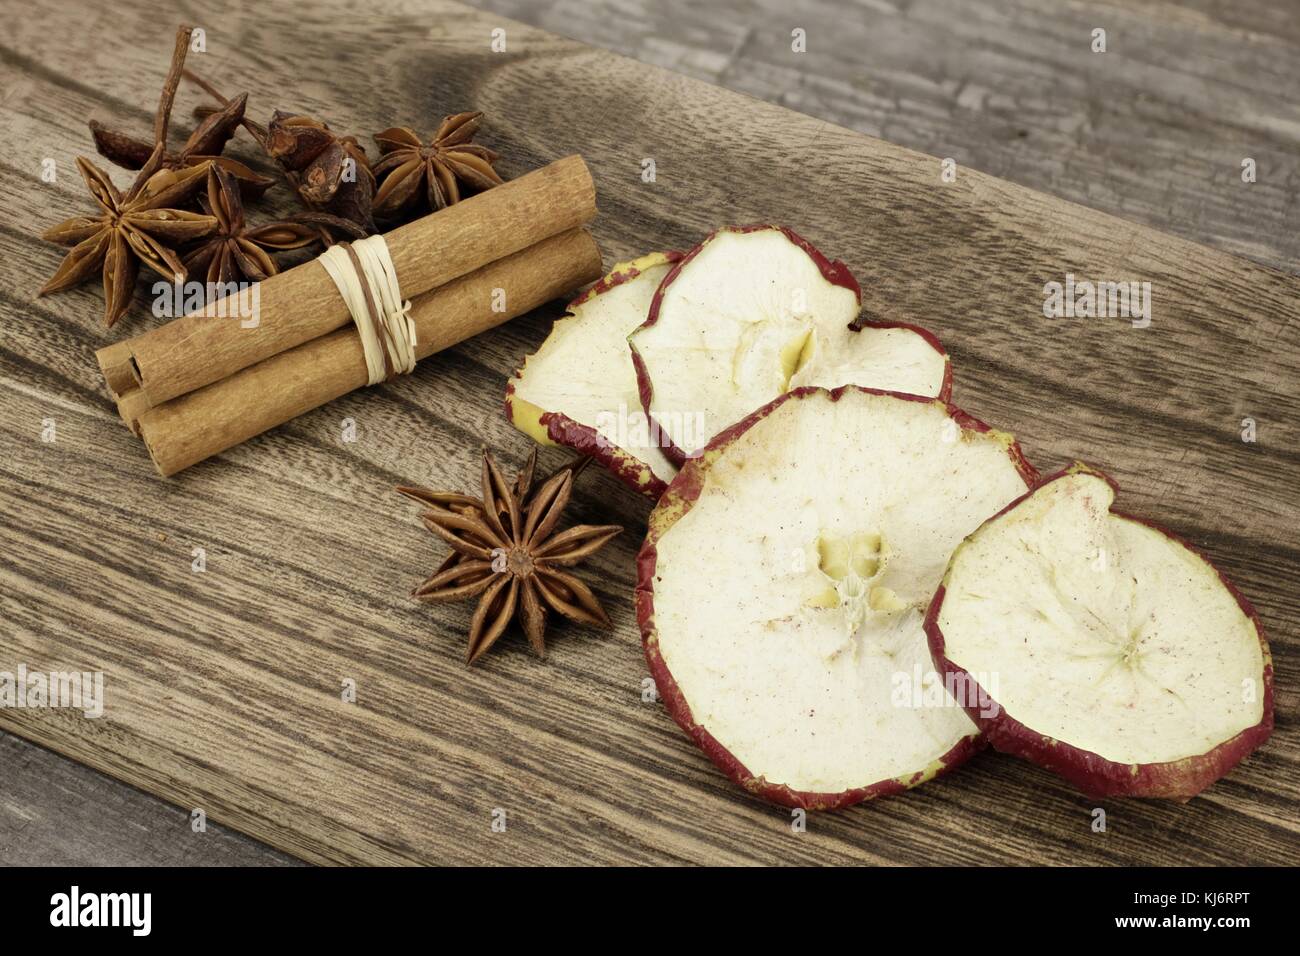 Christmas decoration with star anise, cinnamon sticks and dried apple slices Stock Photo